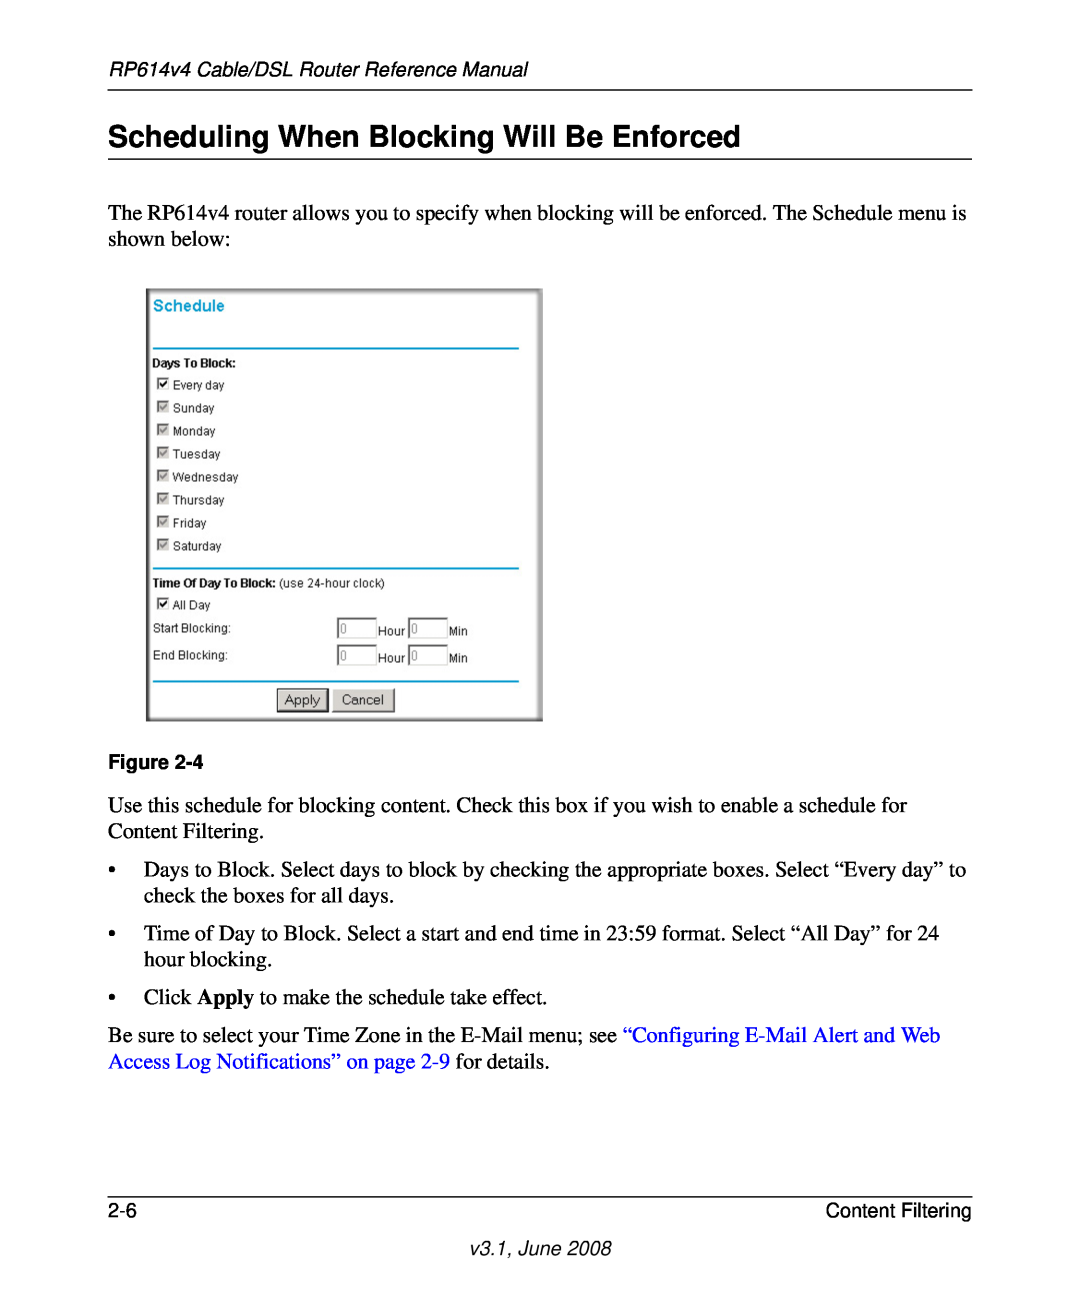 NETGEAR RP614 v4 manual Scheduling When Blocking Will Be Enforced 